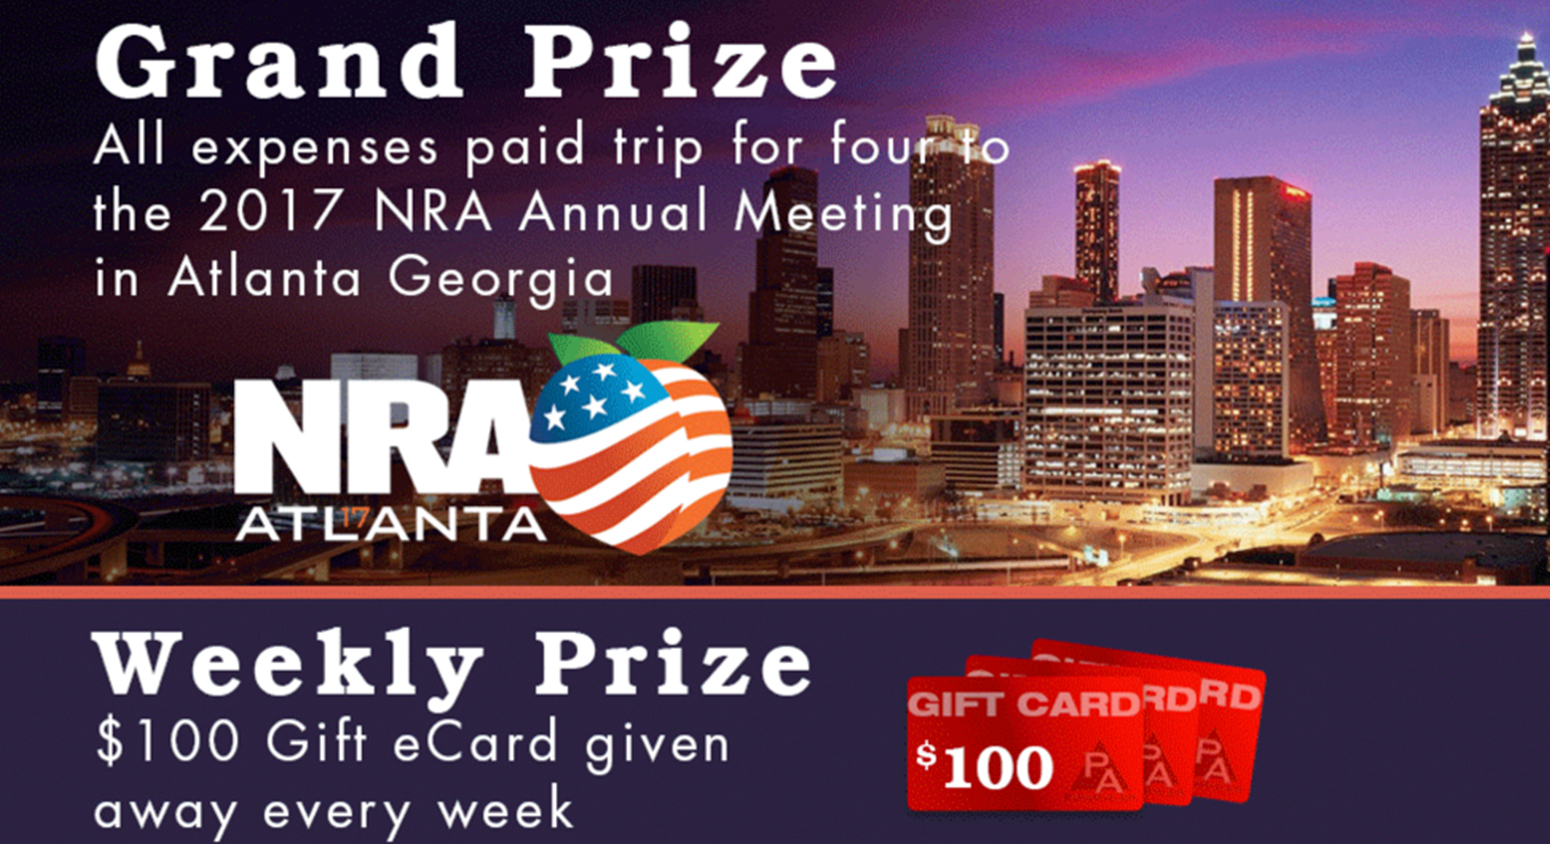 Win a Trip to the 2017 NRA Annual Meeting!